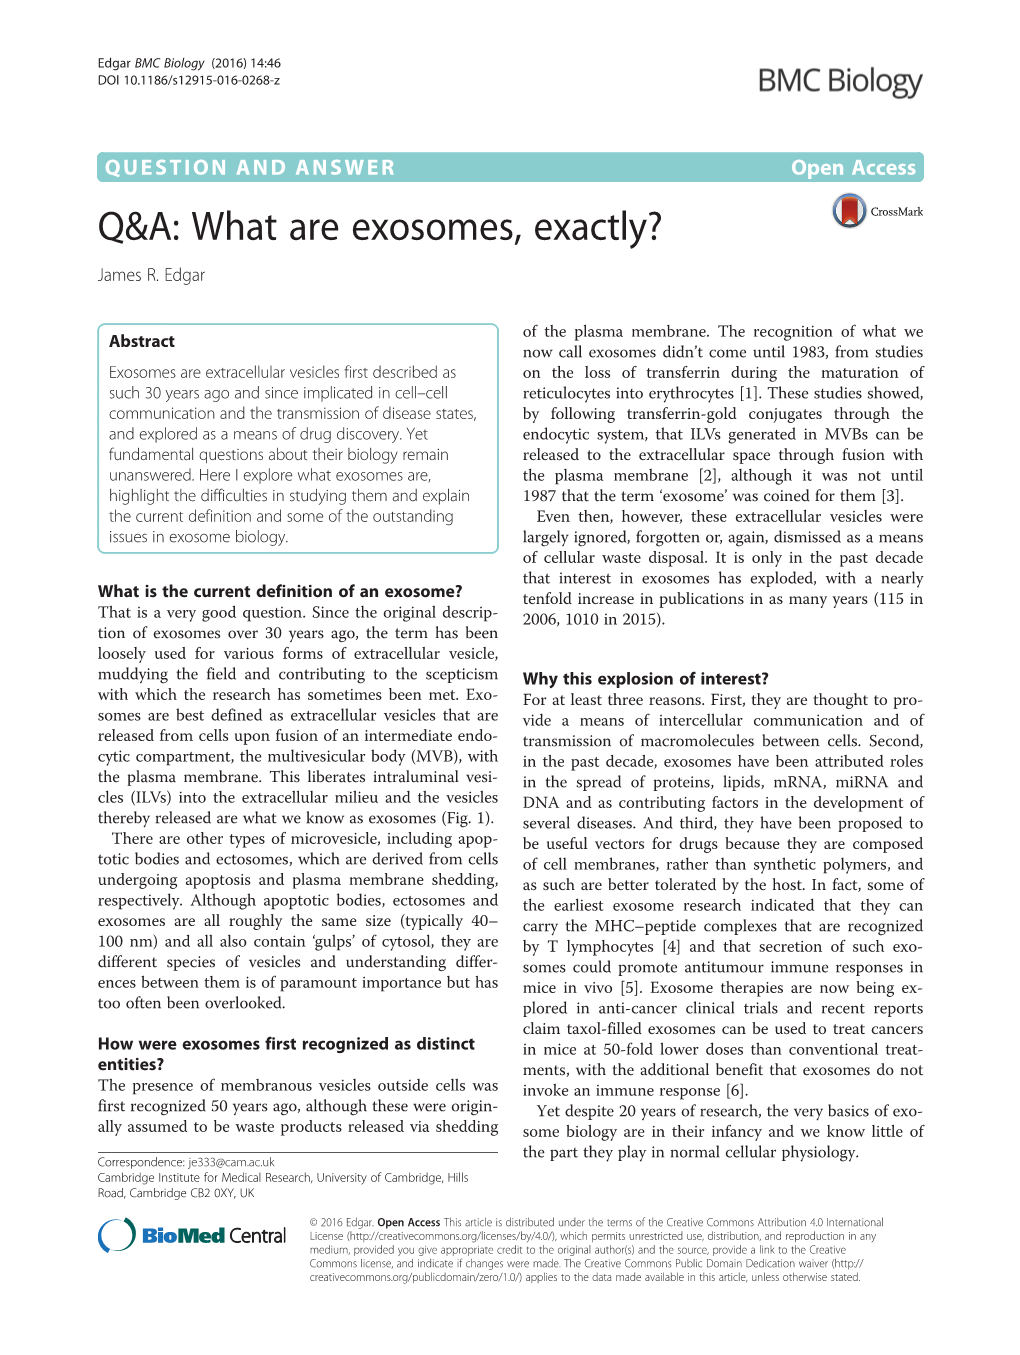 Q&A: What Are Exosomes, Exactly?